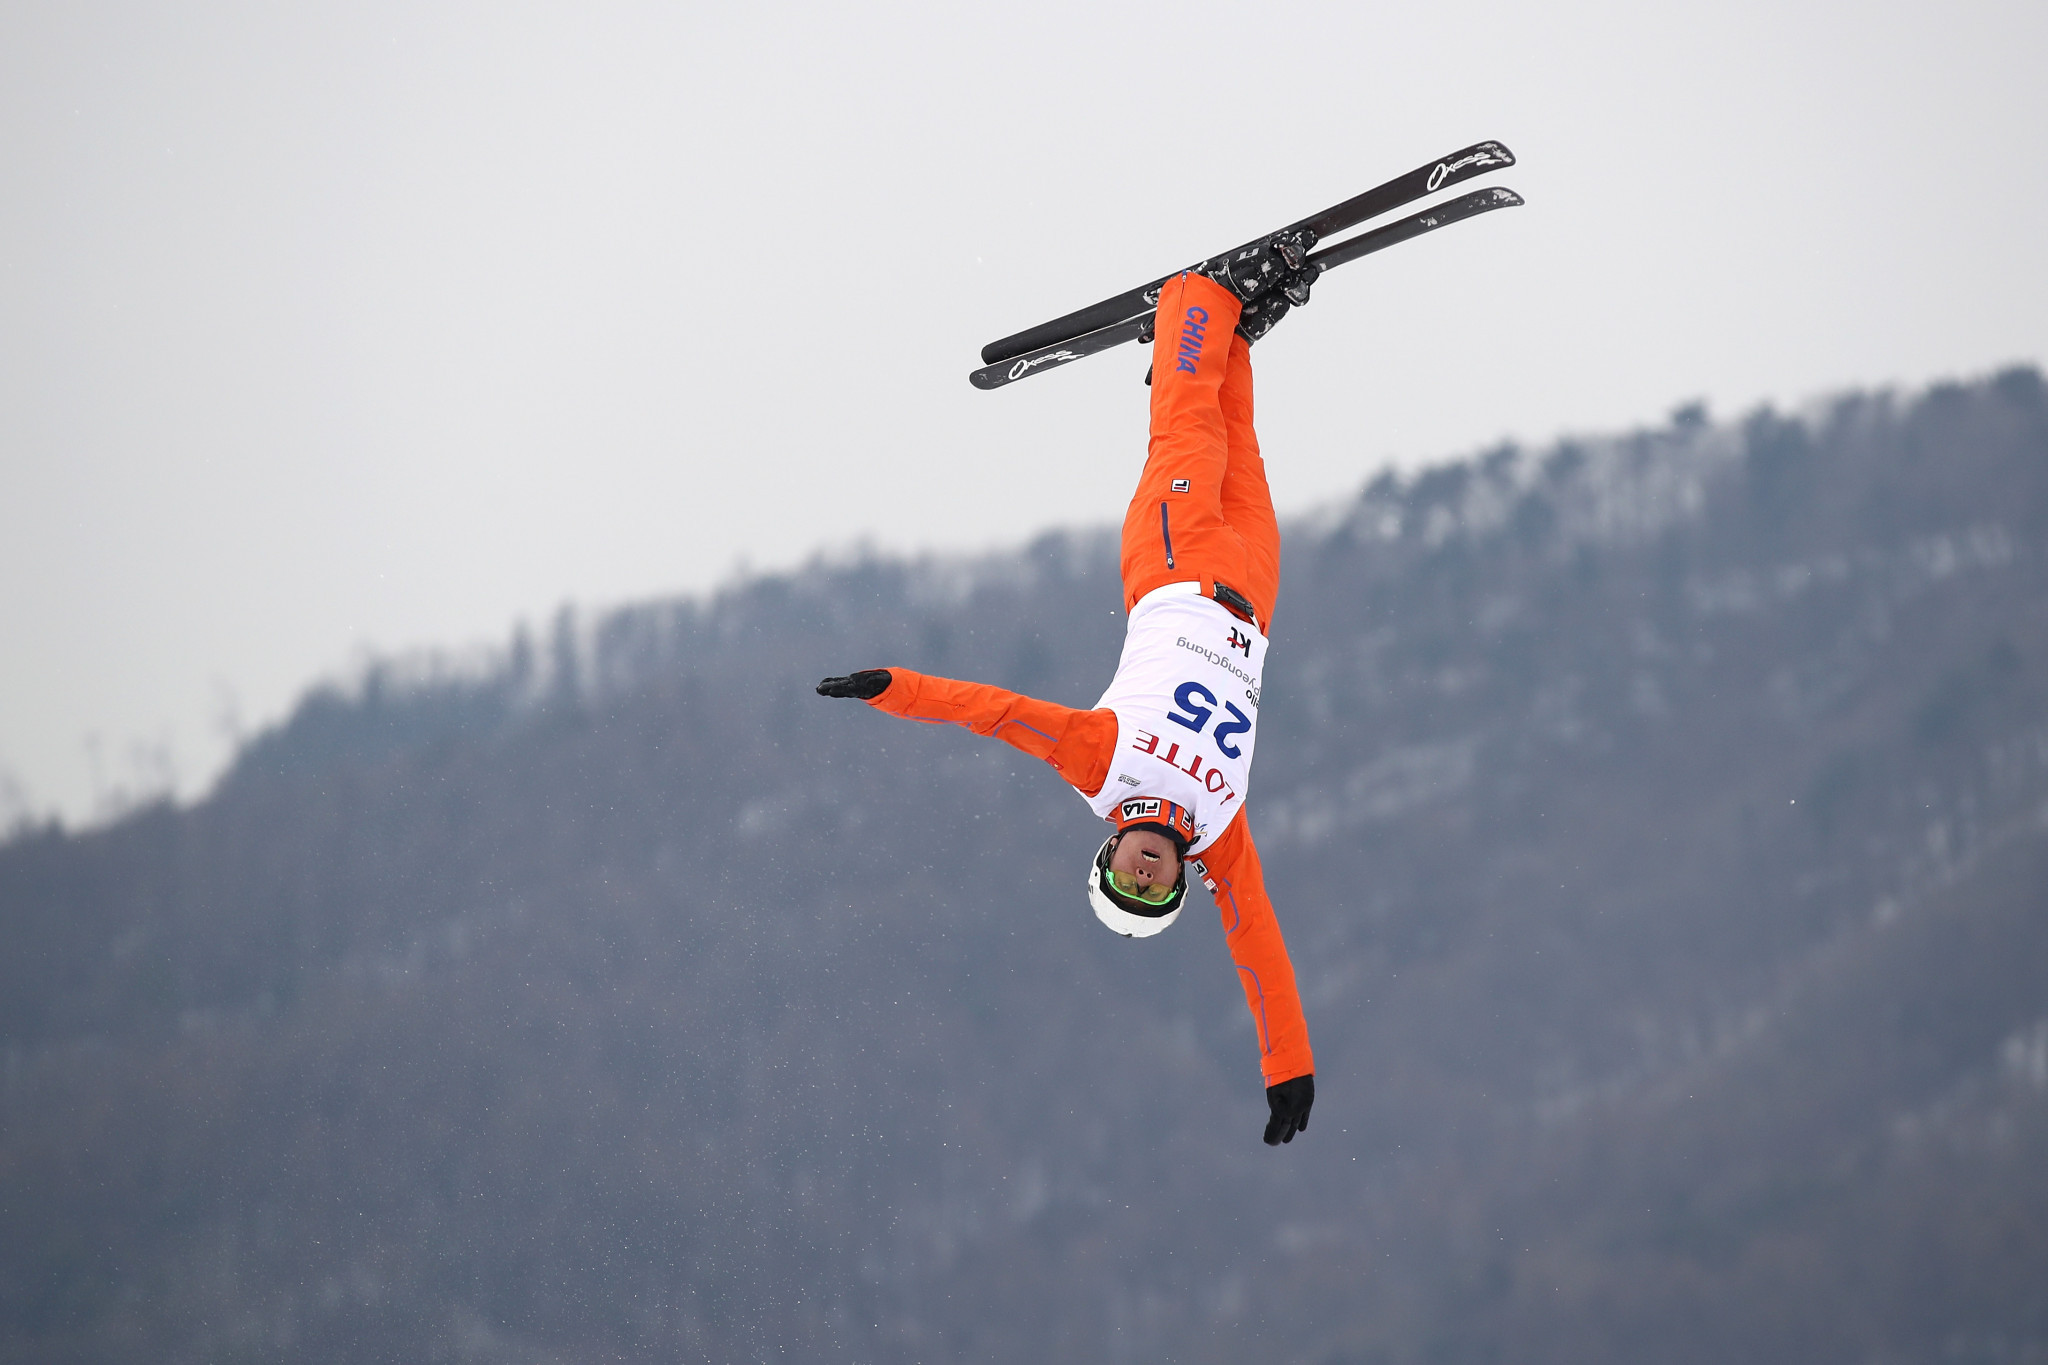 Jia claims second win of the weekend at Aerials World Cup in Secret Garden